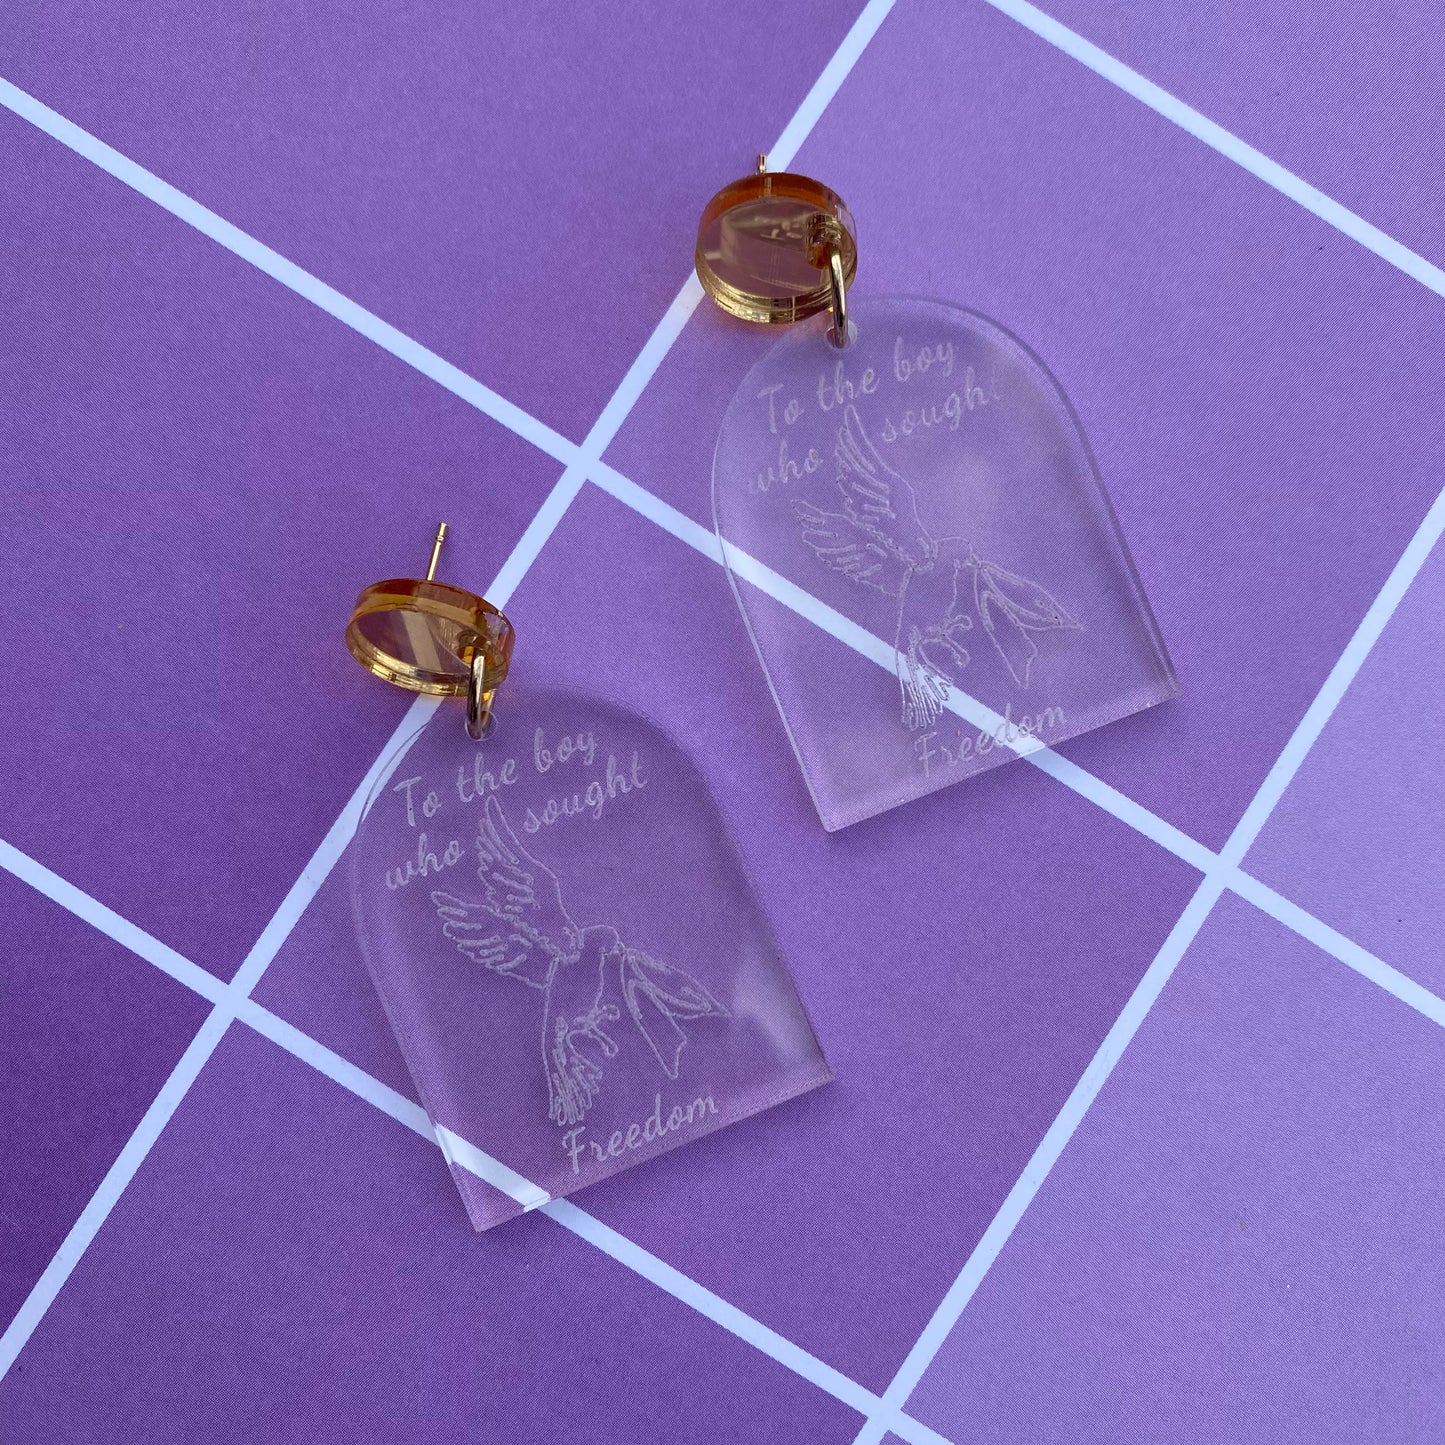 For The Boy Who Sought Freedom Clear Acrylic Earrings